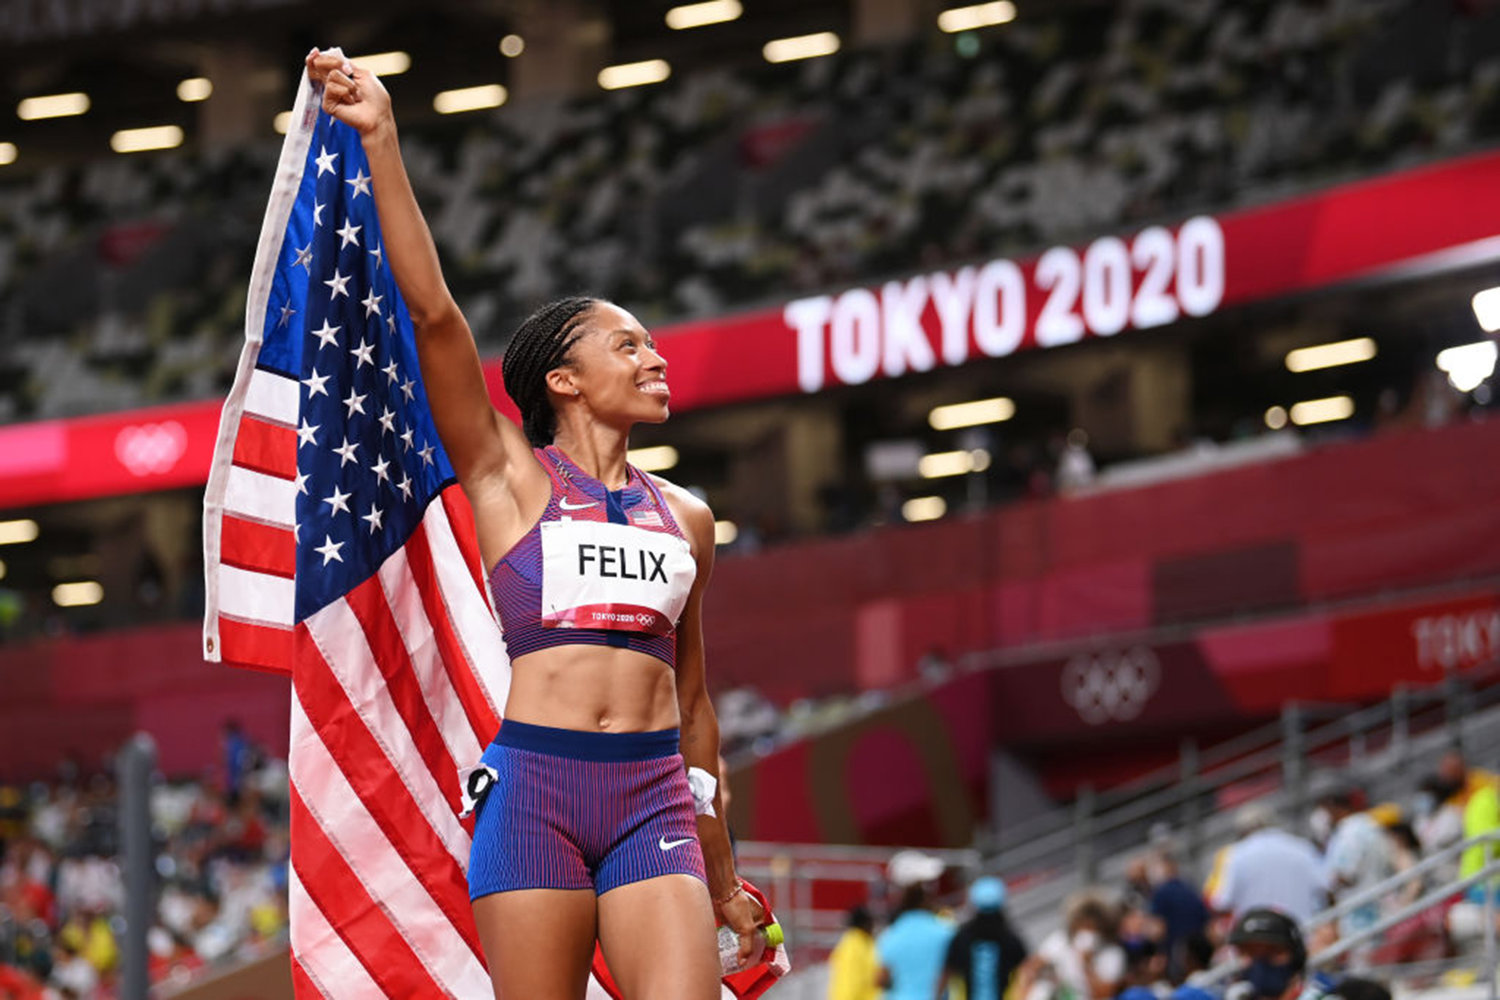 Allyson Felix of Team USA reacts after winning the bronze medal in the Women's 400m Final on day fourteen of the Tokyo 2020 Olympic Games at Olympic Stadium on August 6, 2021 in Tokyo, Japan. (Matthias Hangst/Getty Images/TNS)